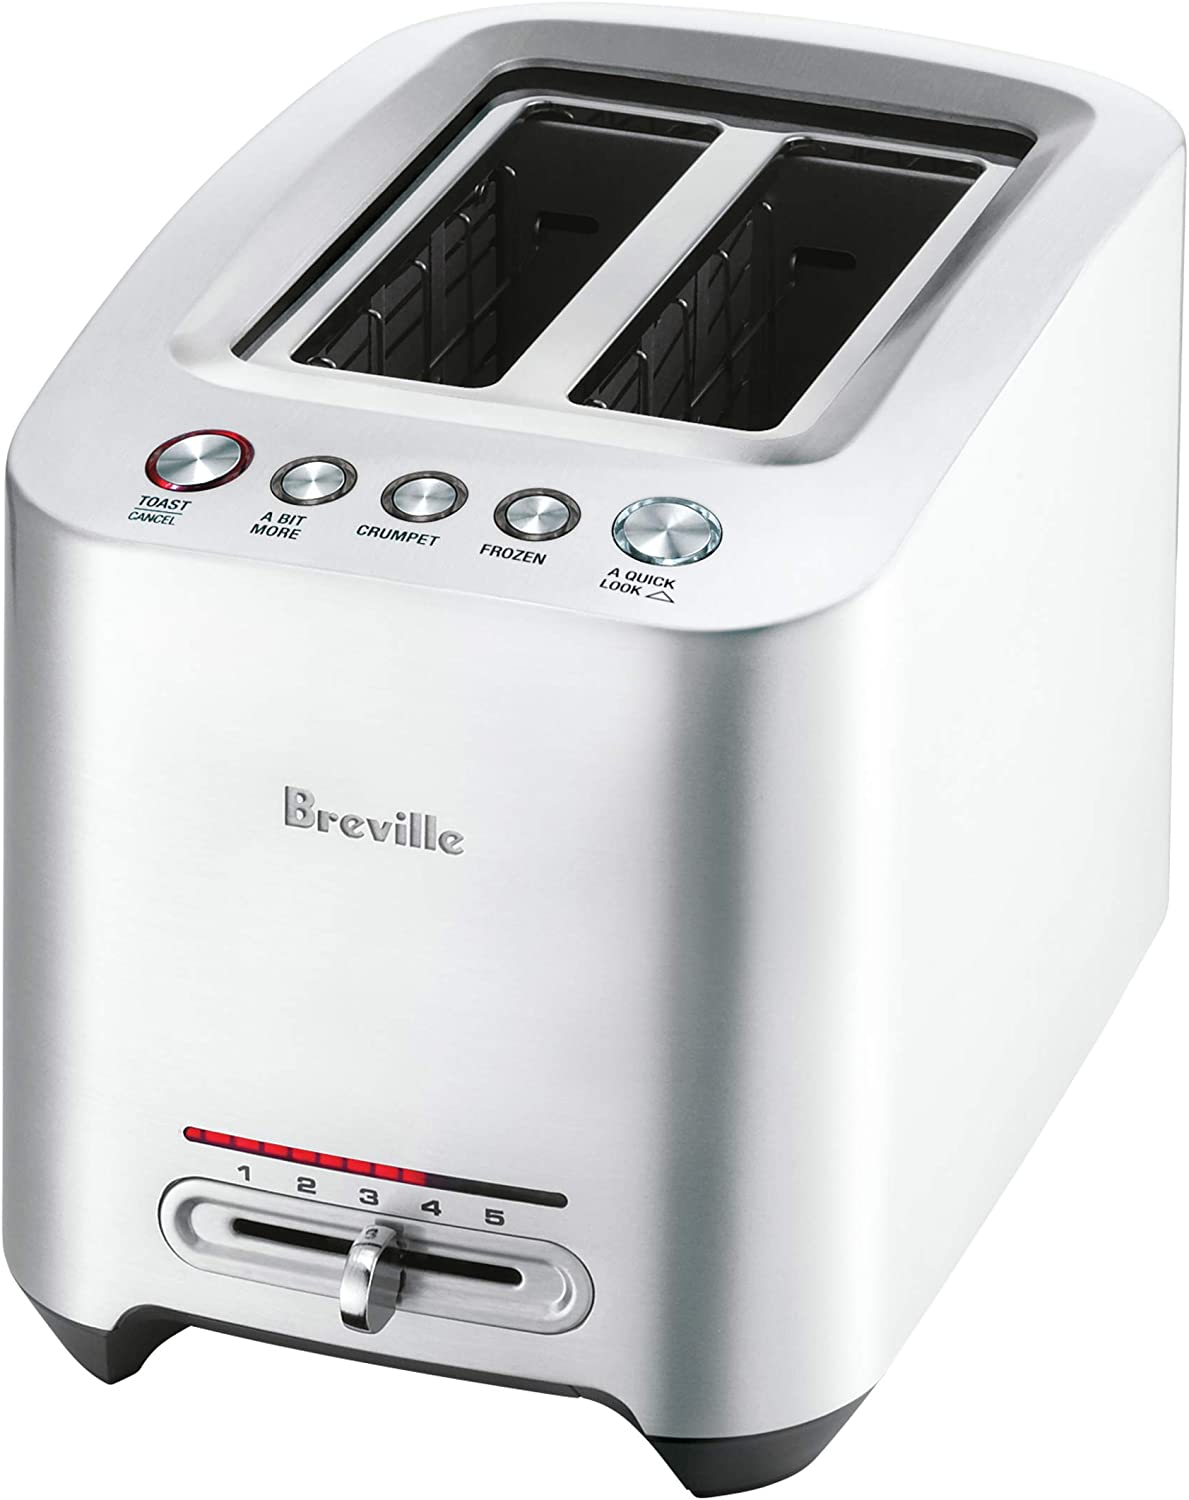 Breville 4-Slice Toaster A Bit More Brushed Stainless Steel BTA730XL Work